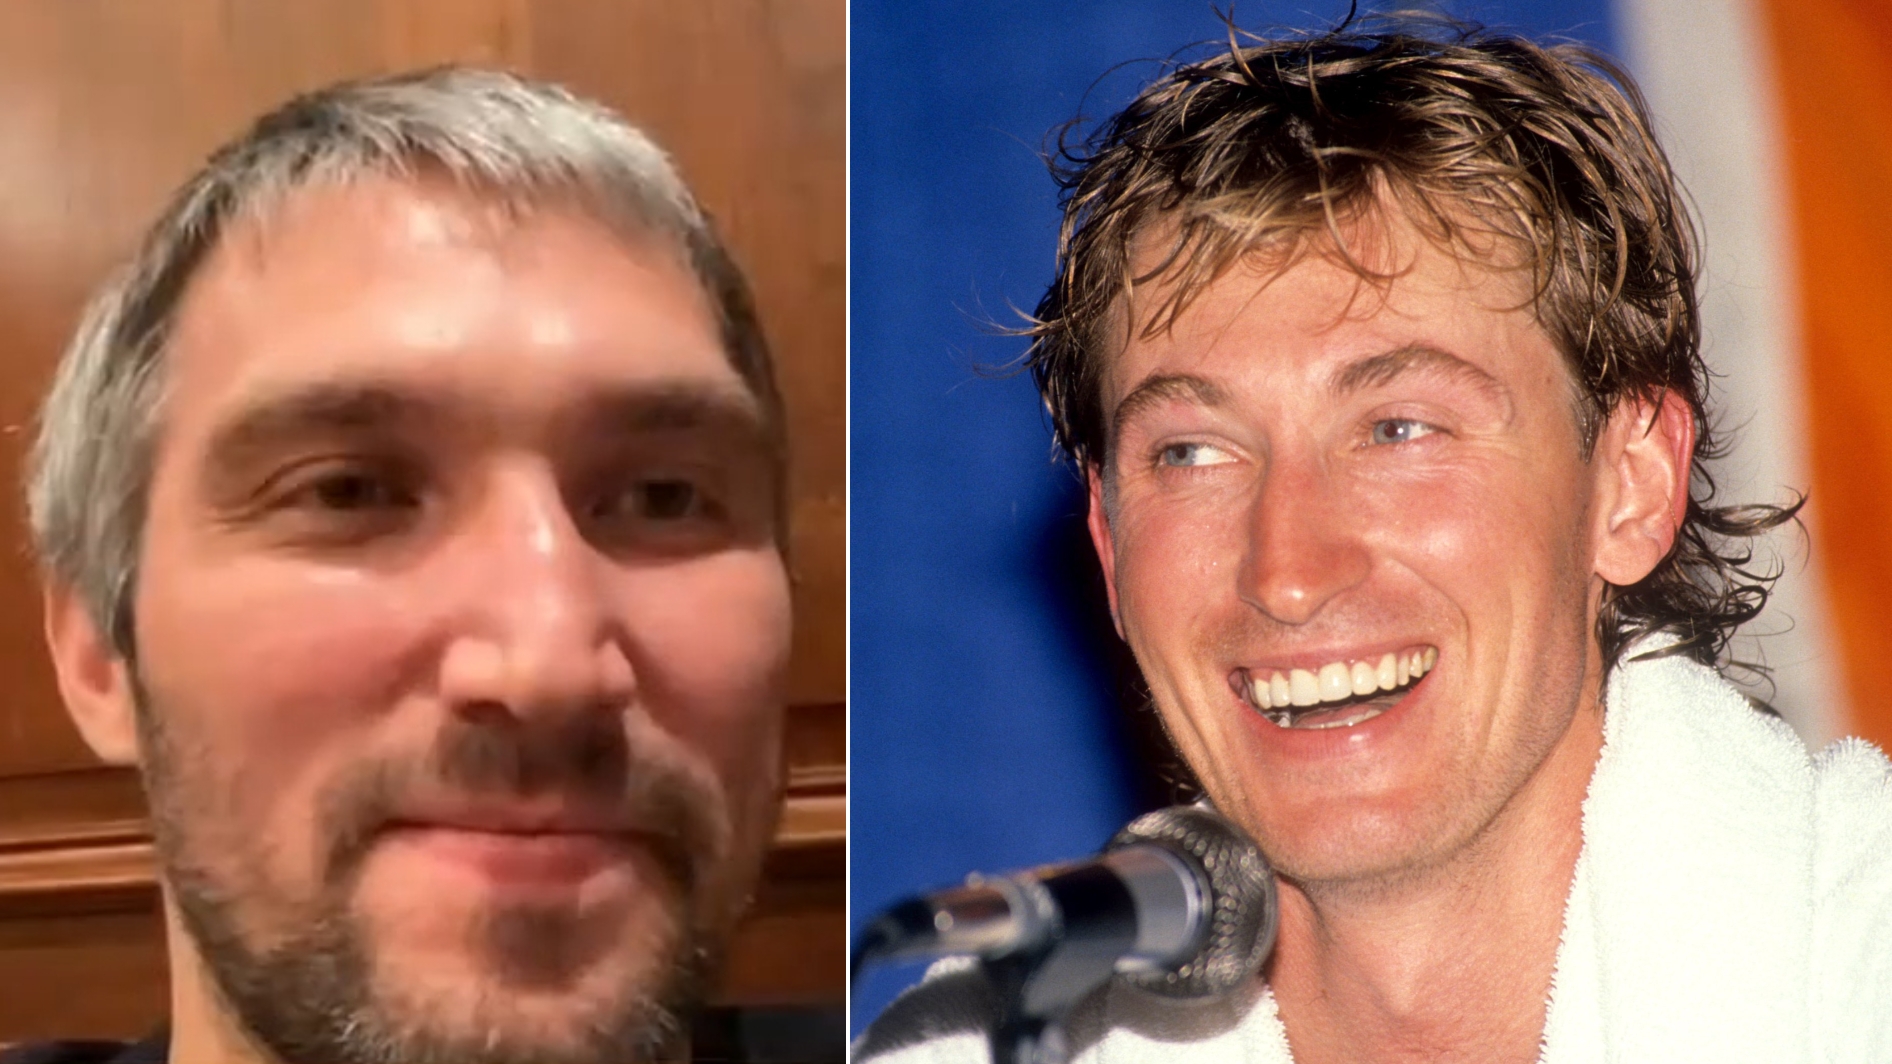 Ovechkin having Gretzky's respect as he closes in on all-time goals record